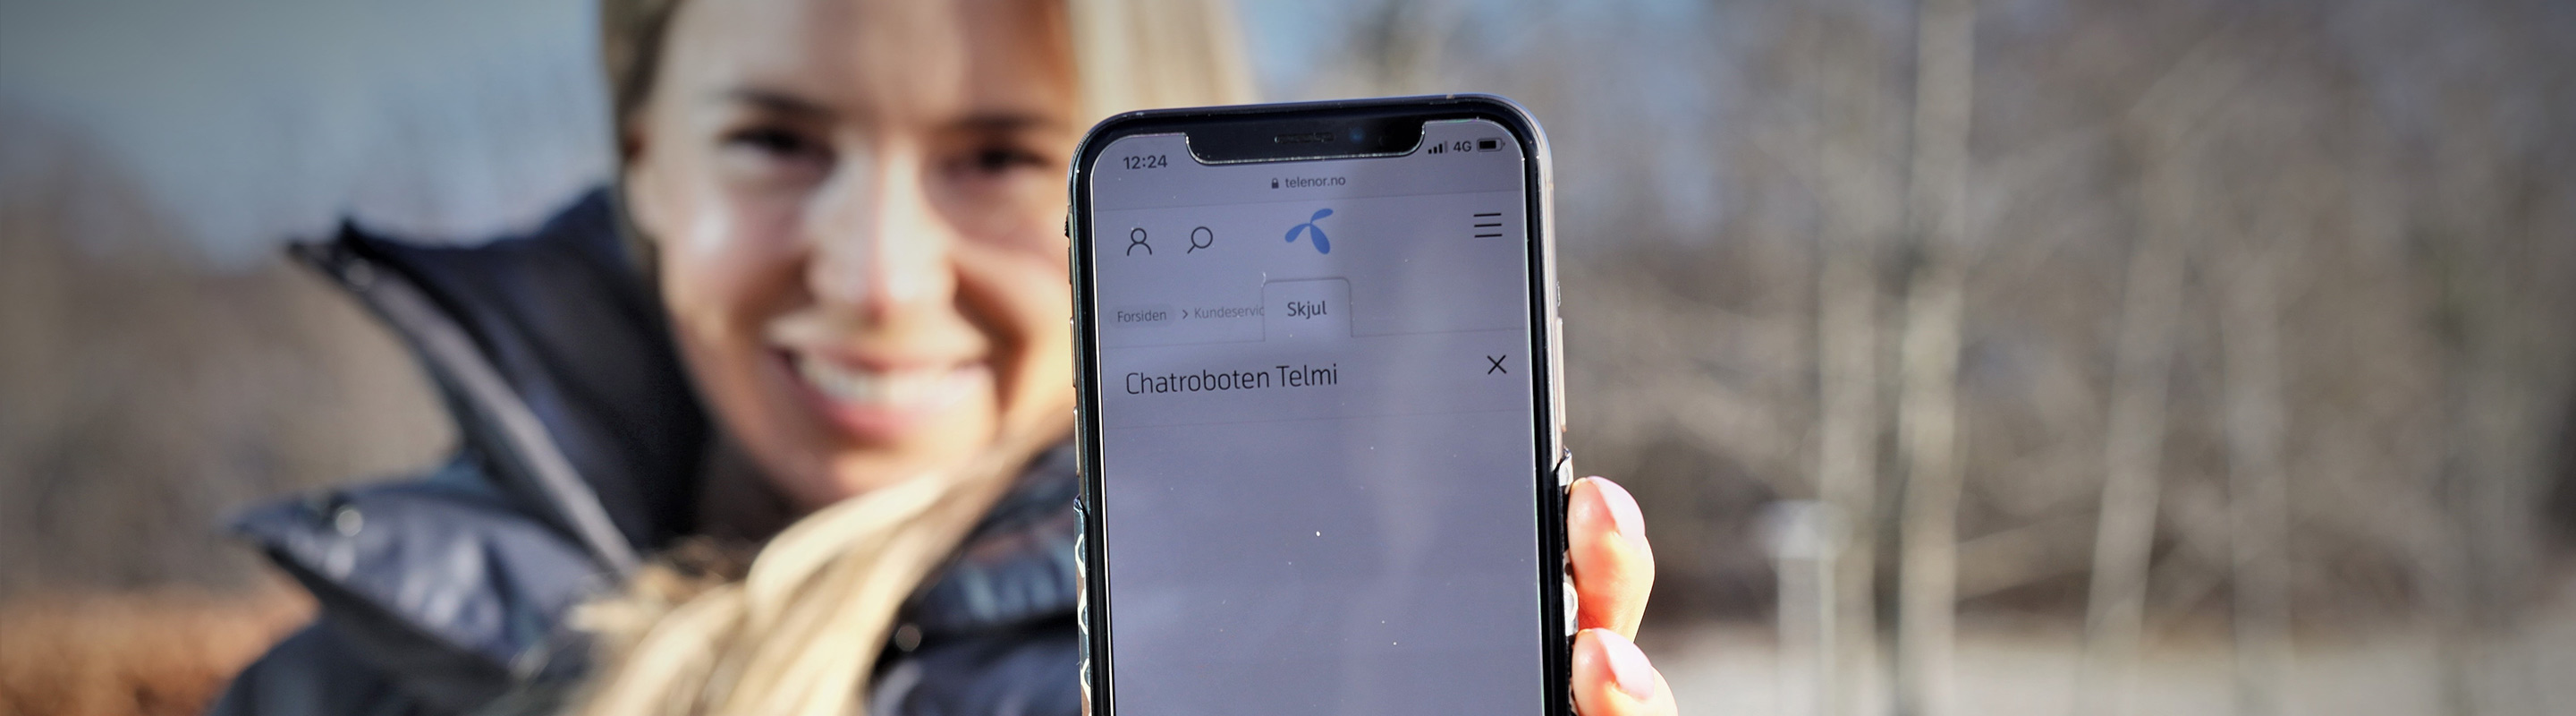 Woman presenting the Telmi chatbot on her smart phone